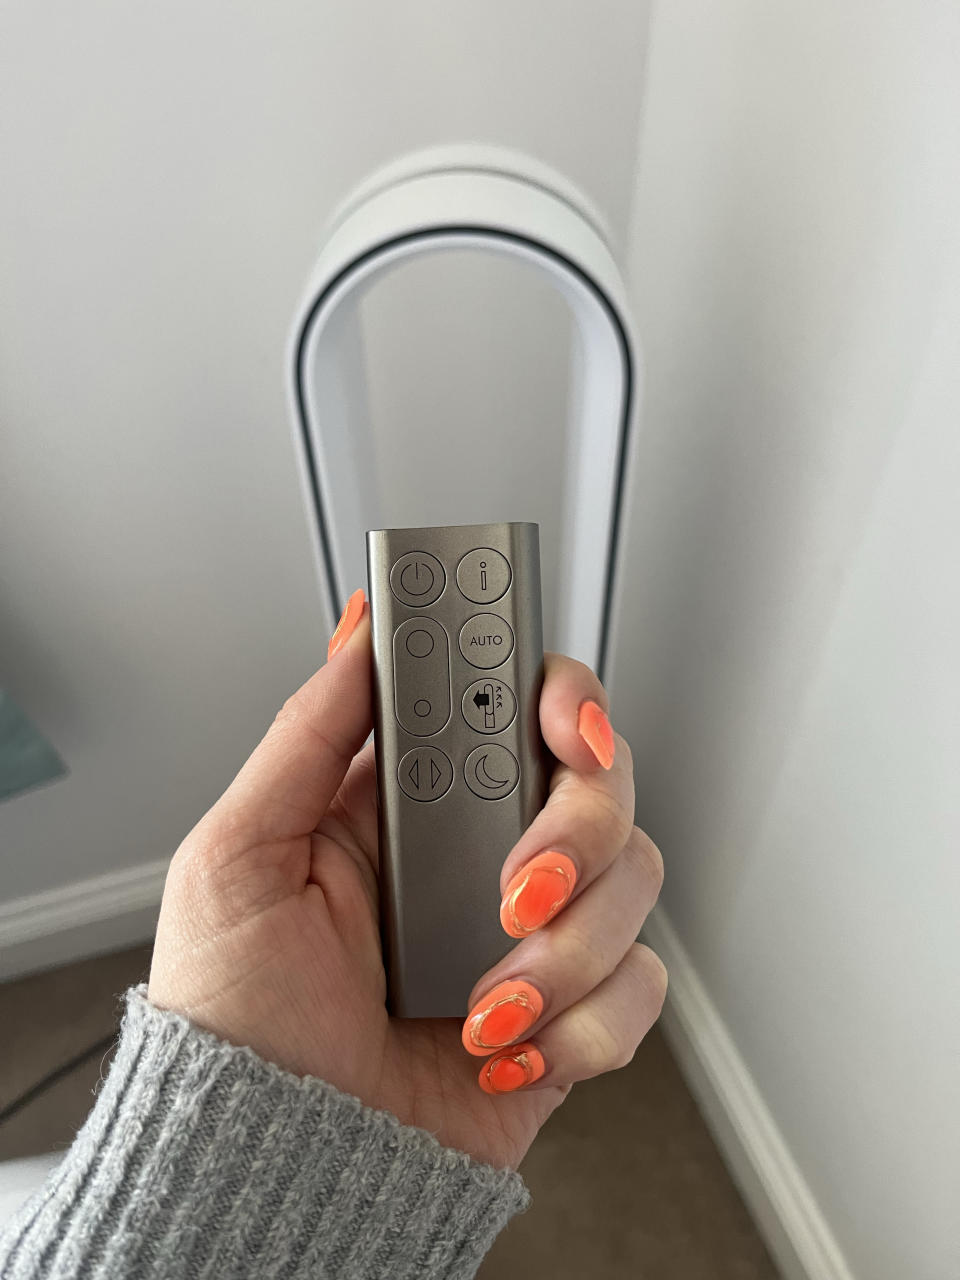 The easy-to-use remote makes changing settings or getting updates on the air quality simple. (Yahoo Life UK)